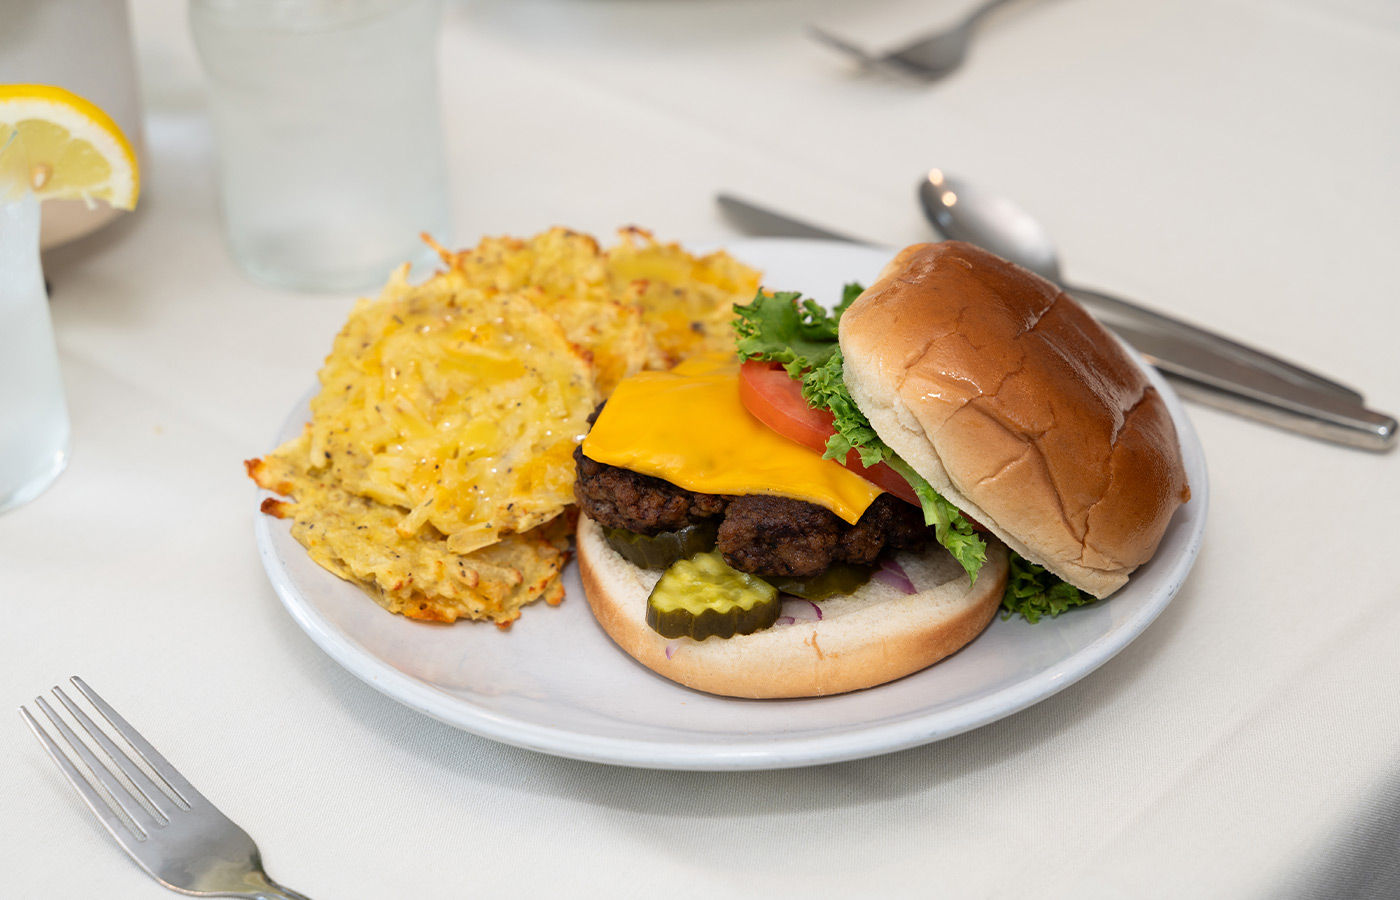 A plate with a burger and hashbrowns on it.